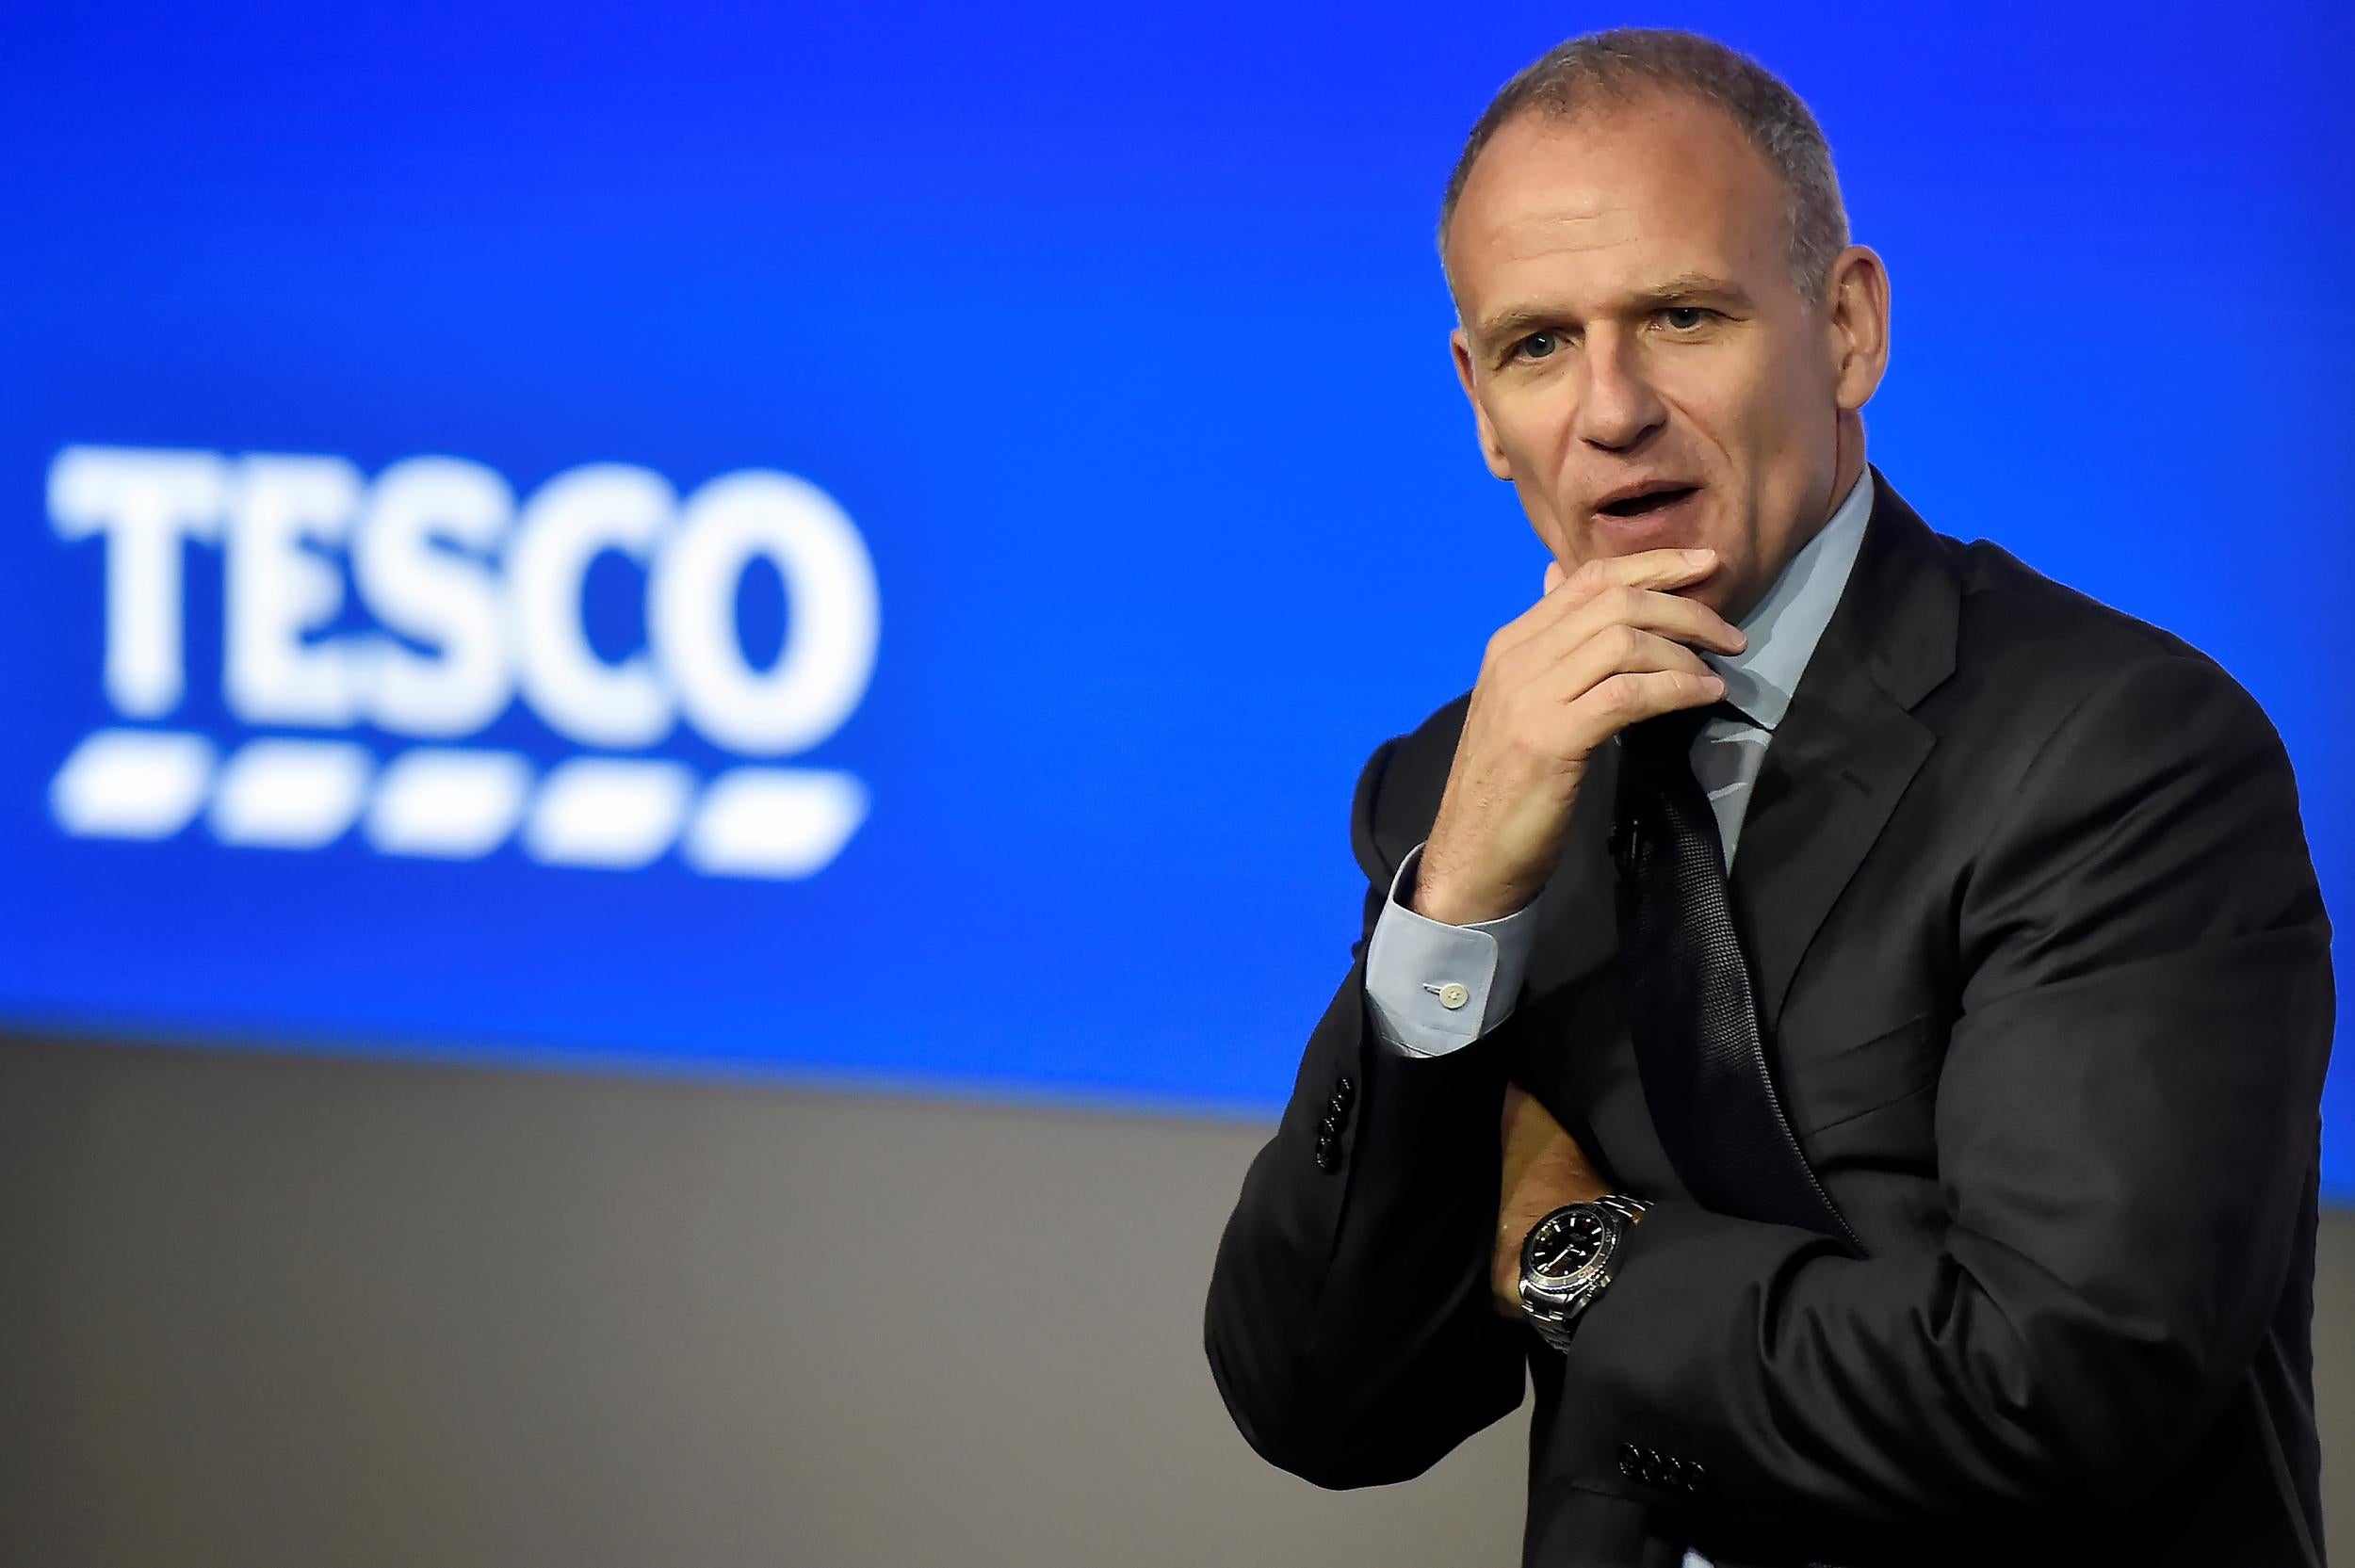 Tesco CEO Dave Lewis has presided over an impressive turnaround